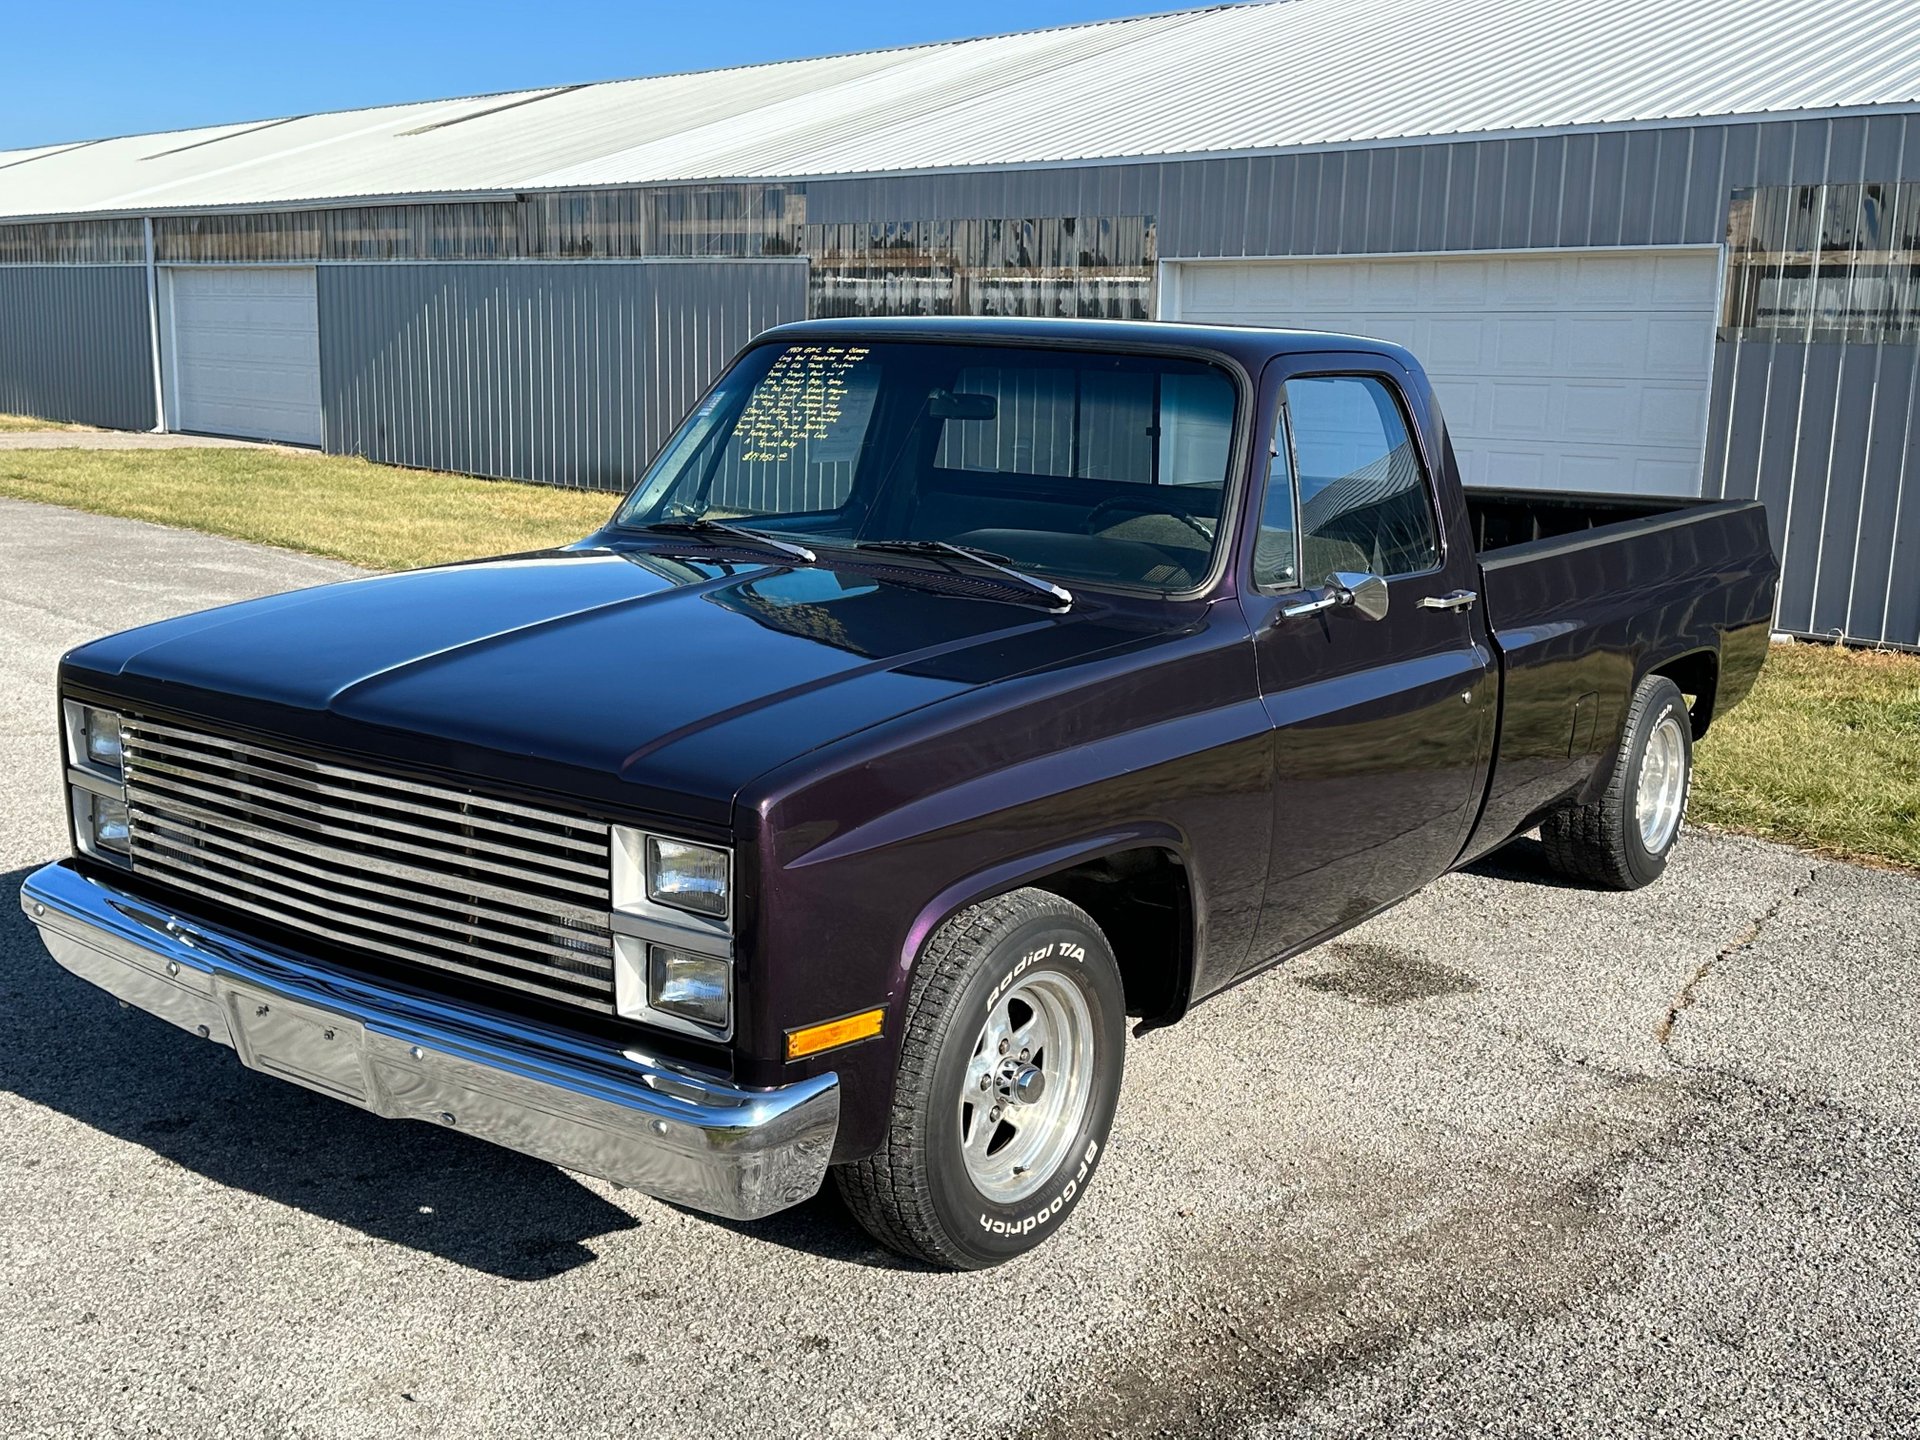 1983 GMC C1500 | Country Classic Cars